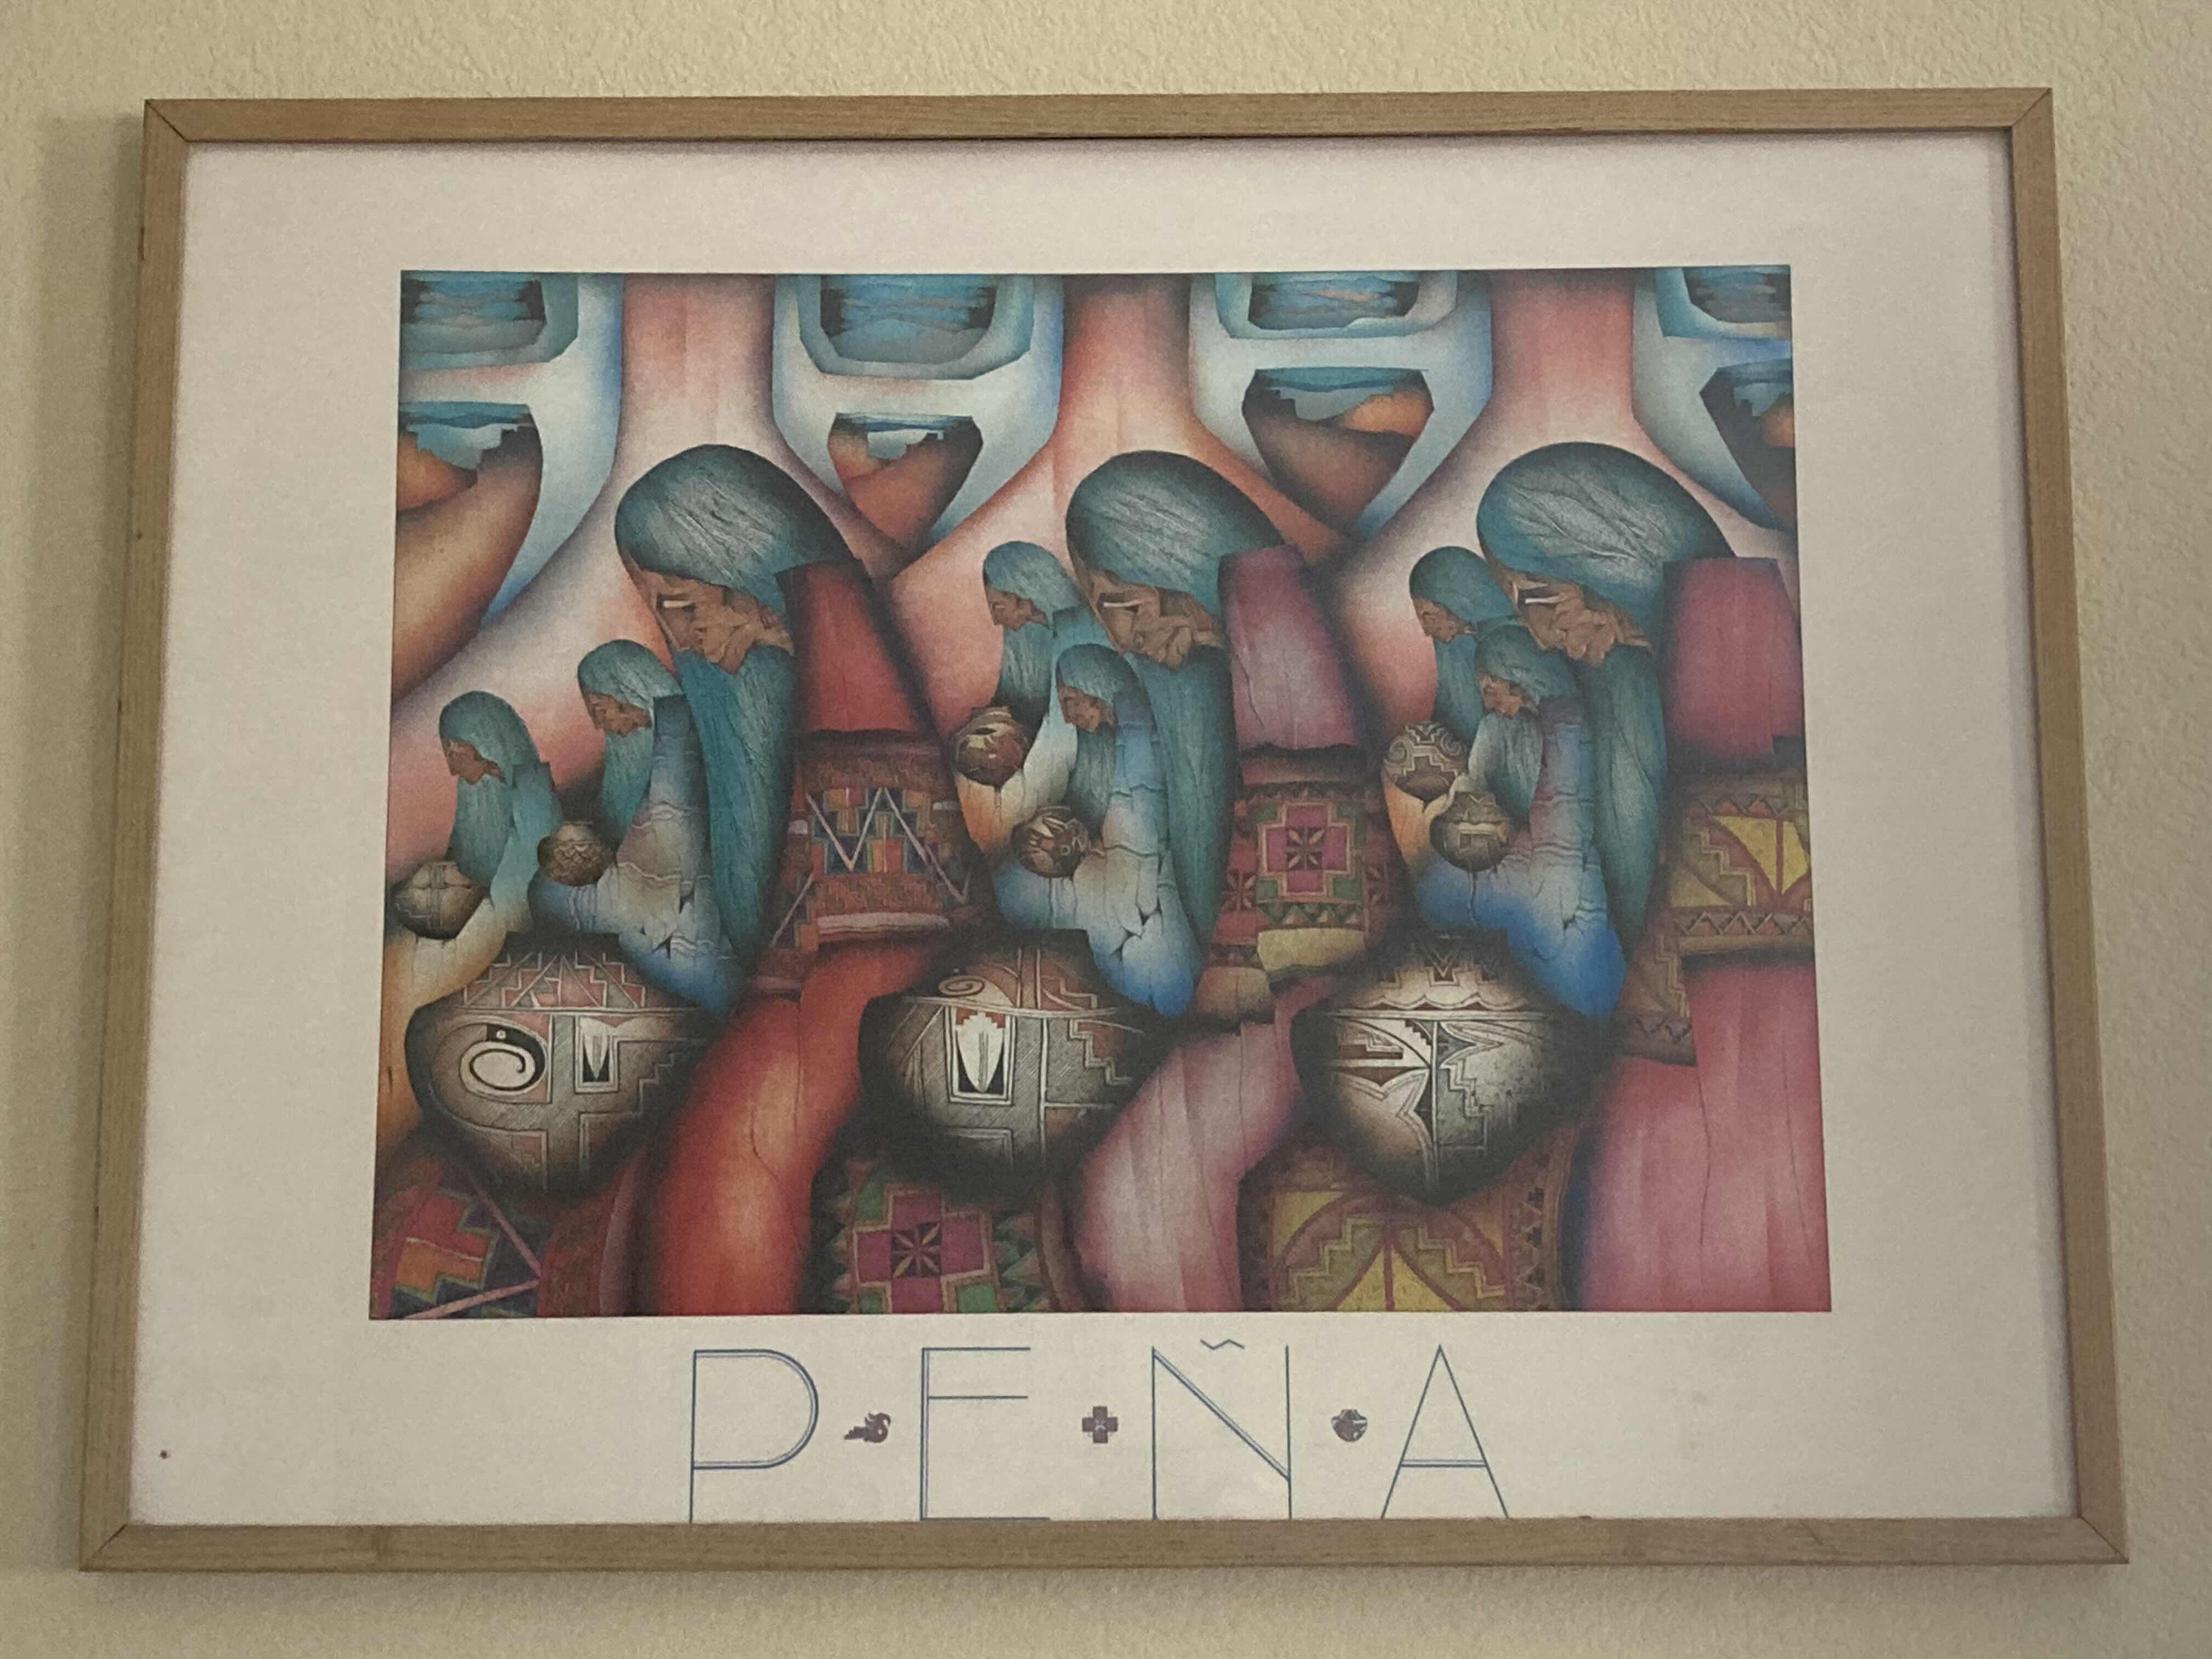 Photo 1 of NATIVE AMERICAN WOMEN ABSTRACT FRAMED REPRINT ARTWORK BY PENA 33” X 25”